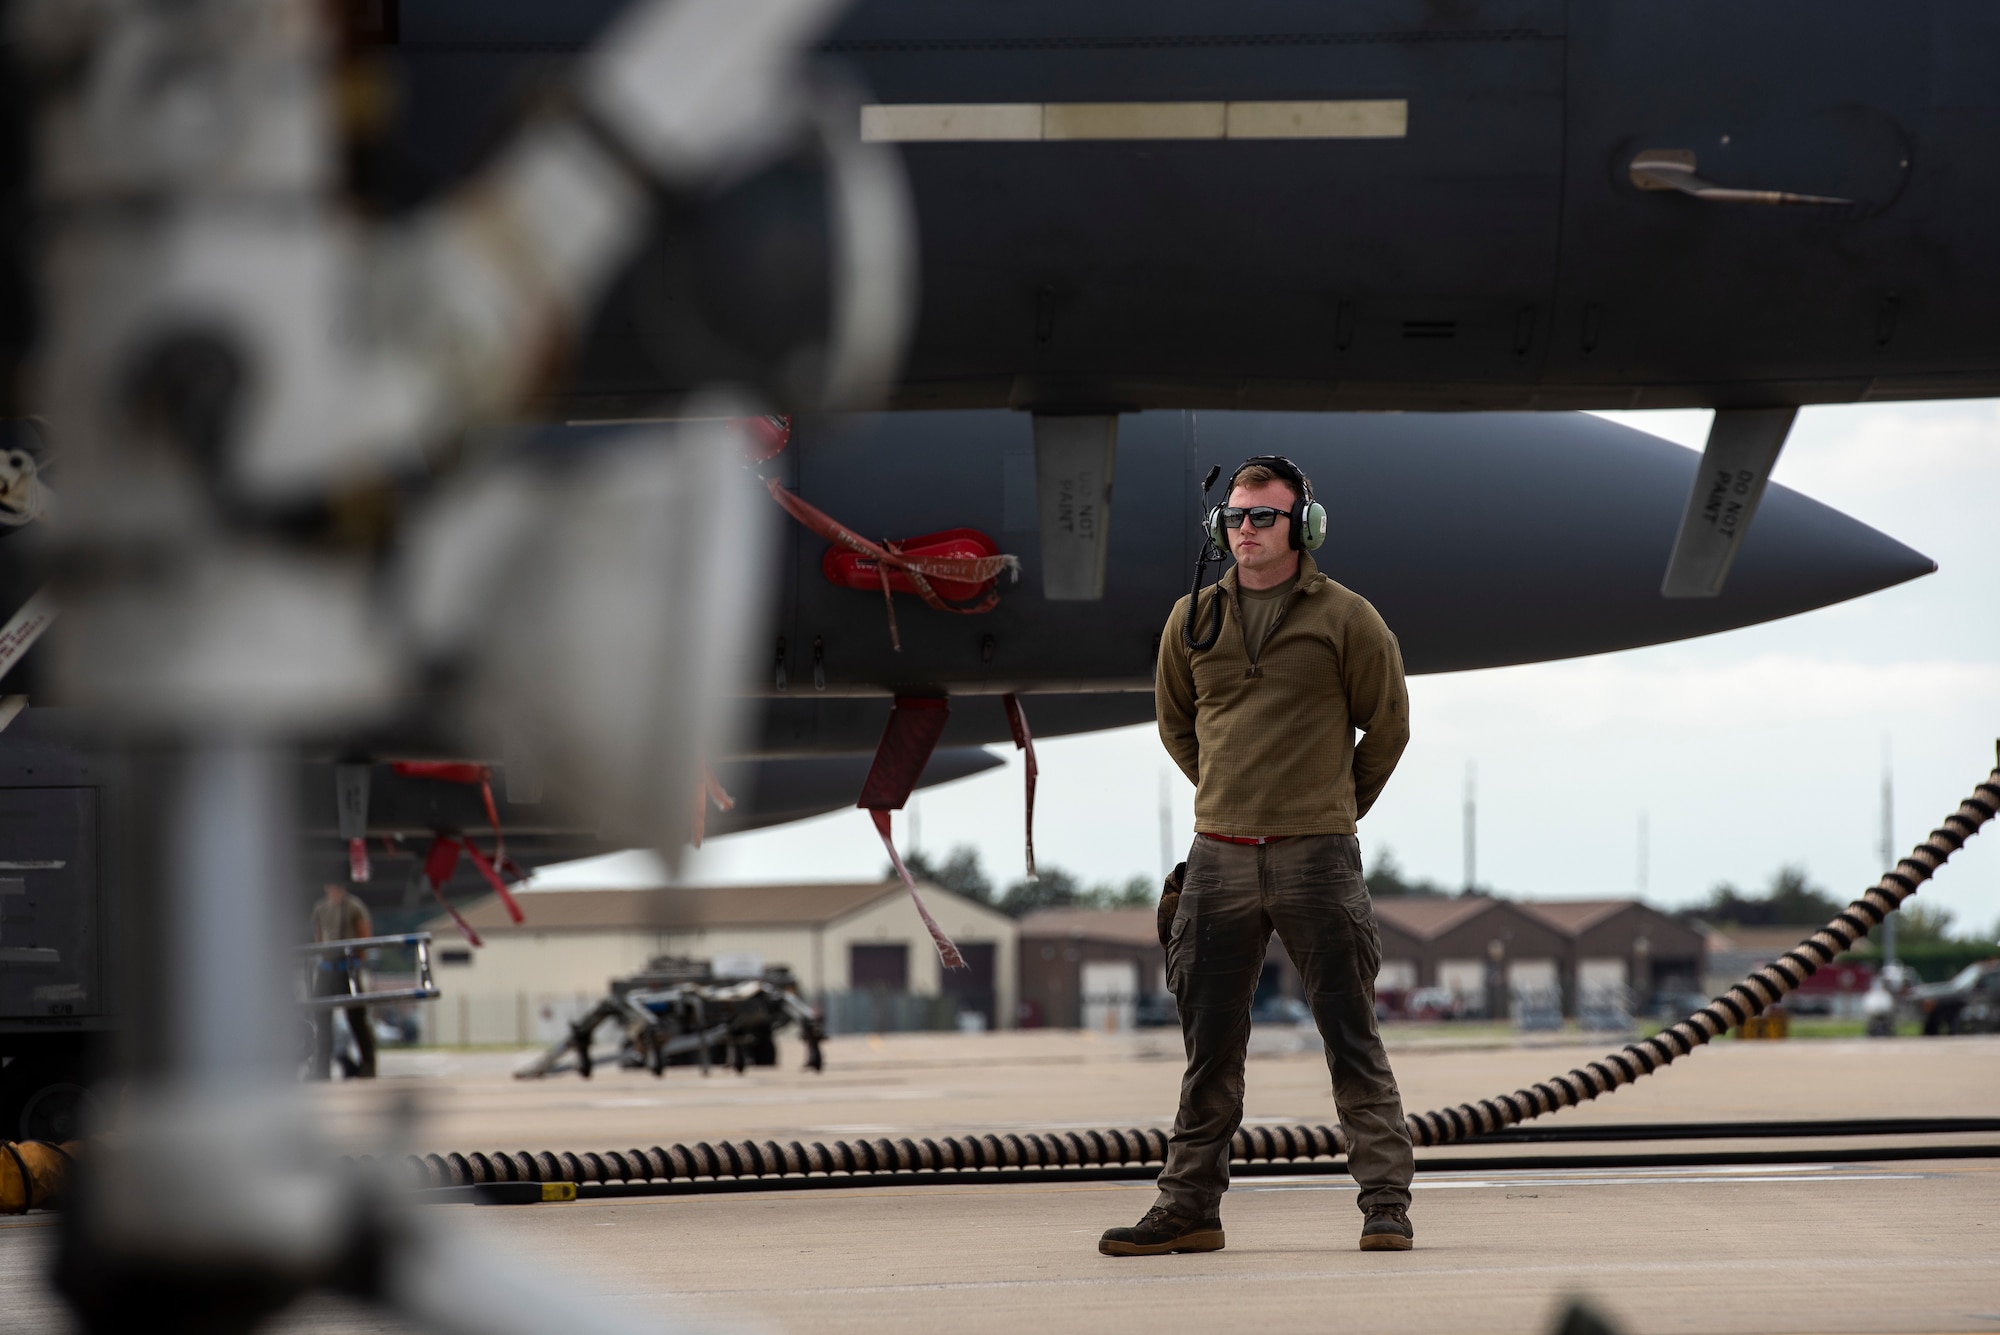 A U.S Air Force crew chief, assigned to the 494th Fighter Squadron, prepares for aircraft recovery after a training sortie at Royal Air Force Lakenheath, England, Sept. 2, 2020. The Liberty Wing is dedicated to maintaining combat readiness through daily training in order to safeguard U.S. national interests and those of NATO Allies and partners. (U.S. Air Force photo by Airman 1st Class Jessi Monte)